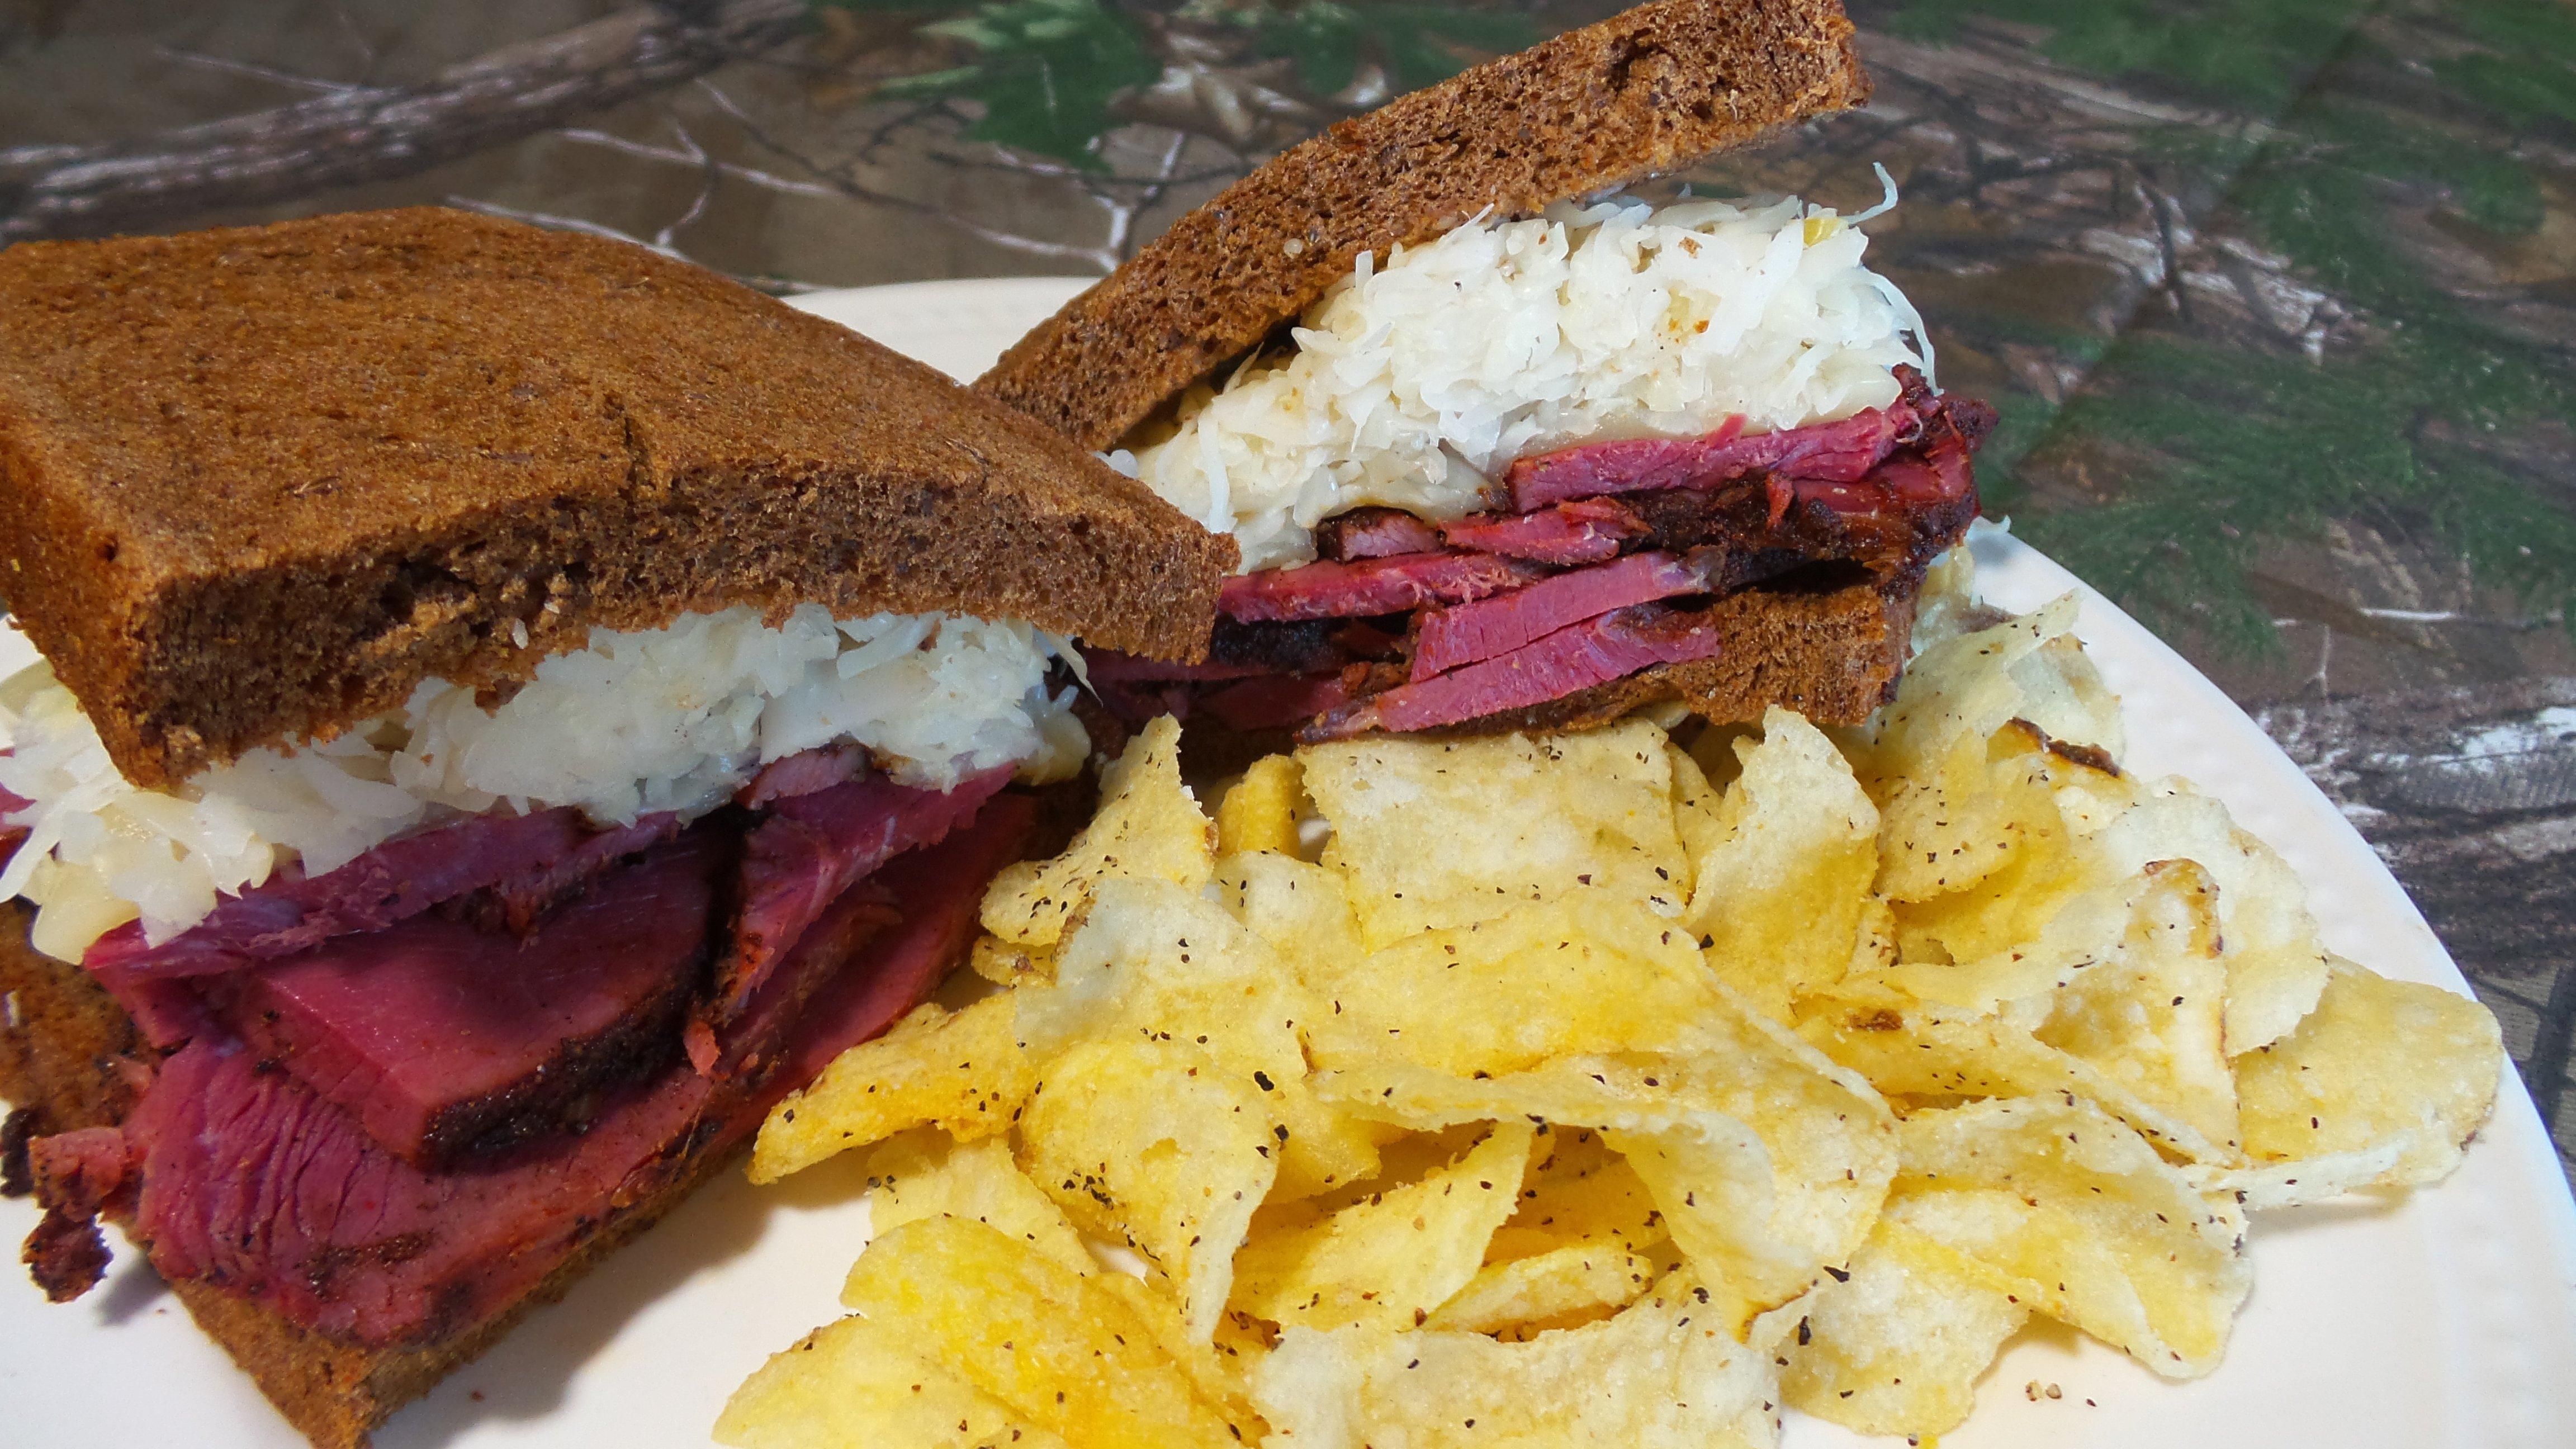 A Reuben on rye with sauerkraut and swiss cheese is a classic.